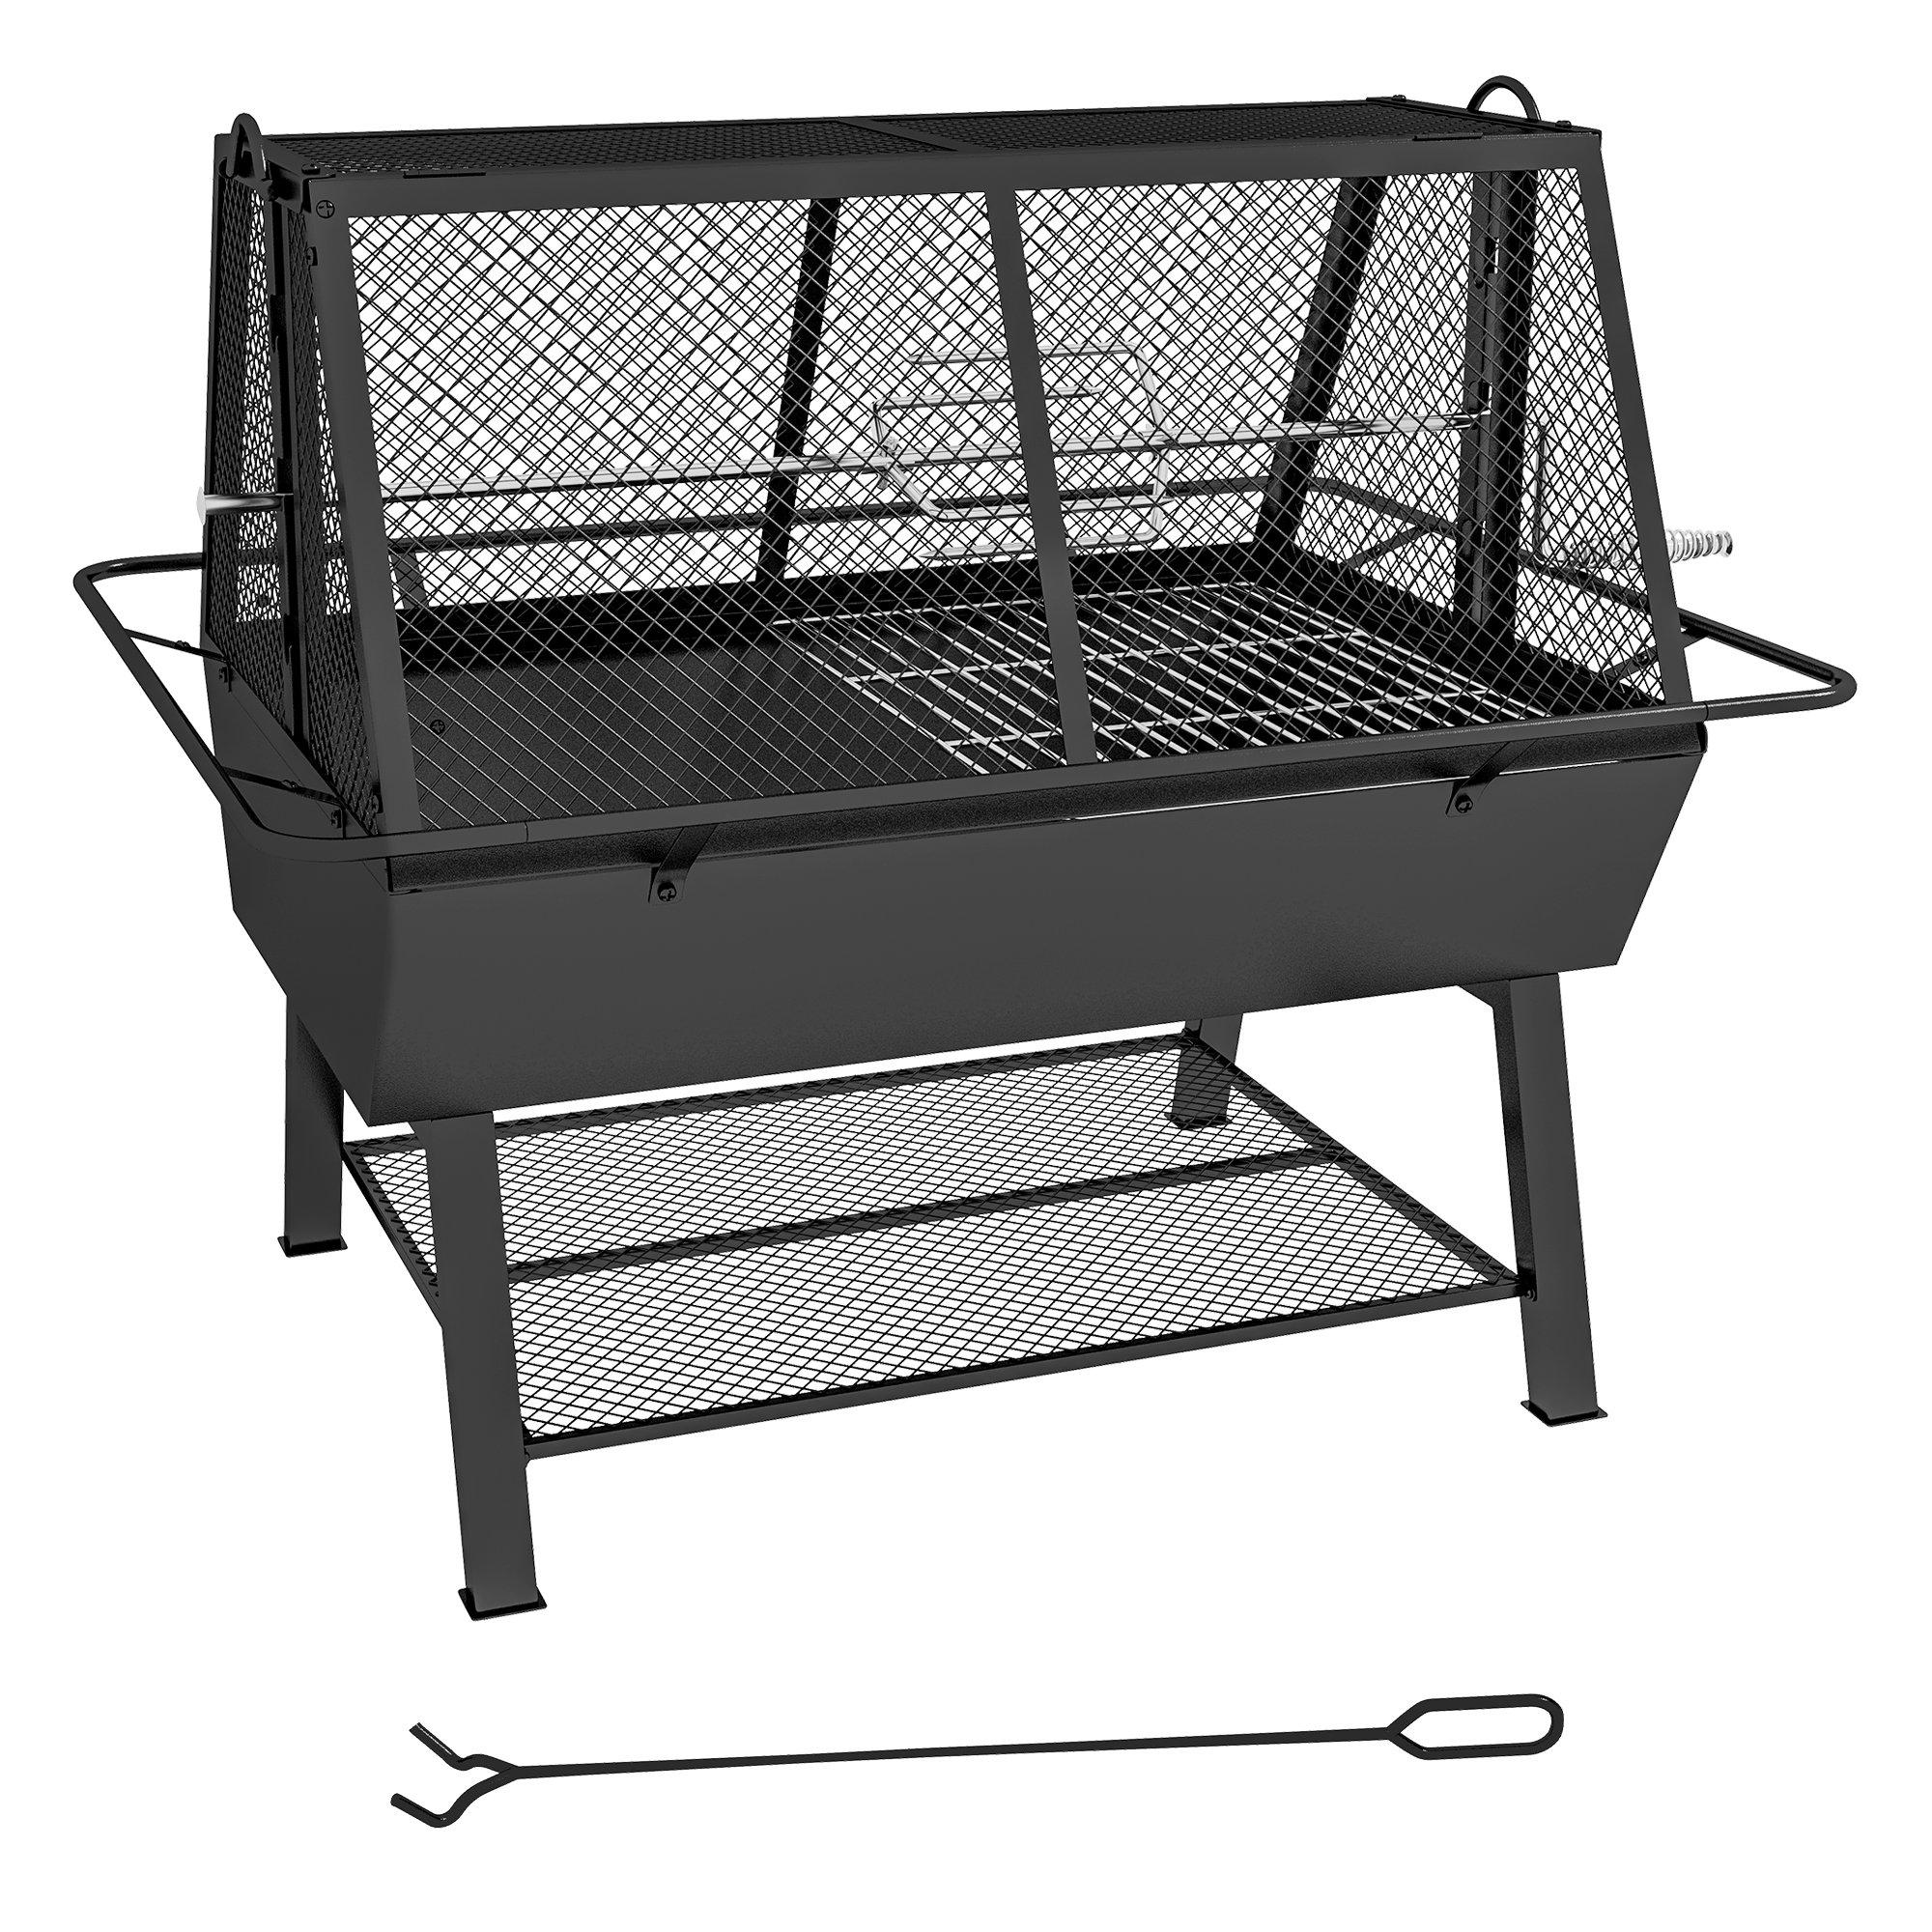 3-in-1 Charcoal Barbecue Grill, Rotisserie Roaster, Fire Pit with Shelf Mesh Lid